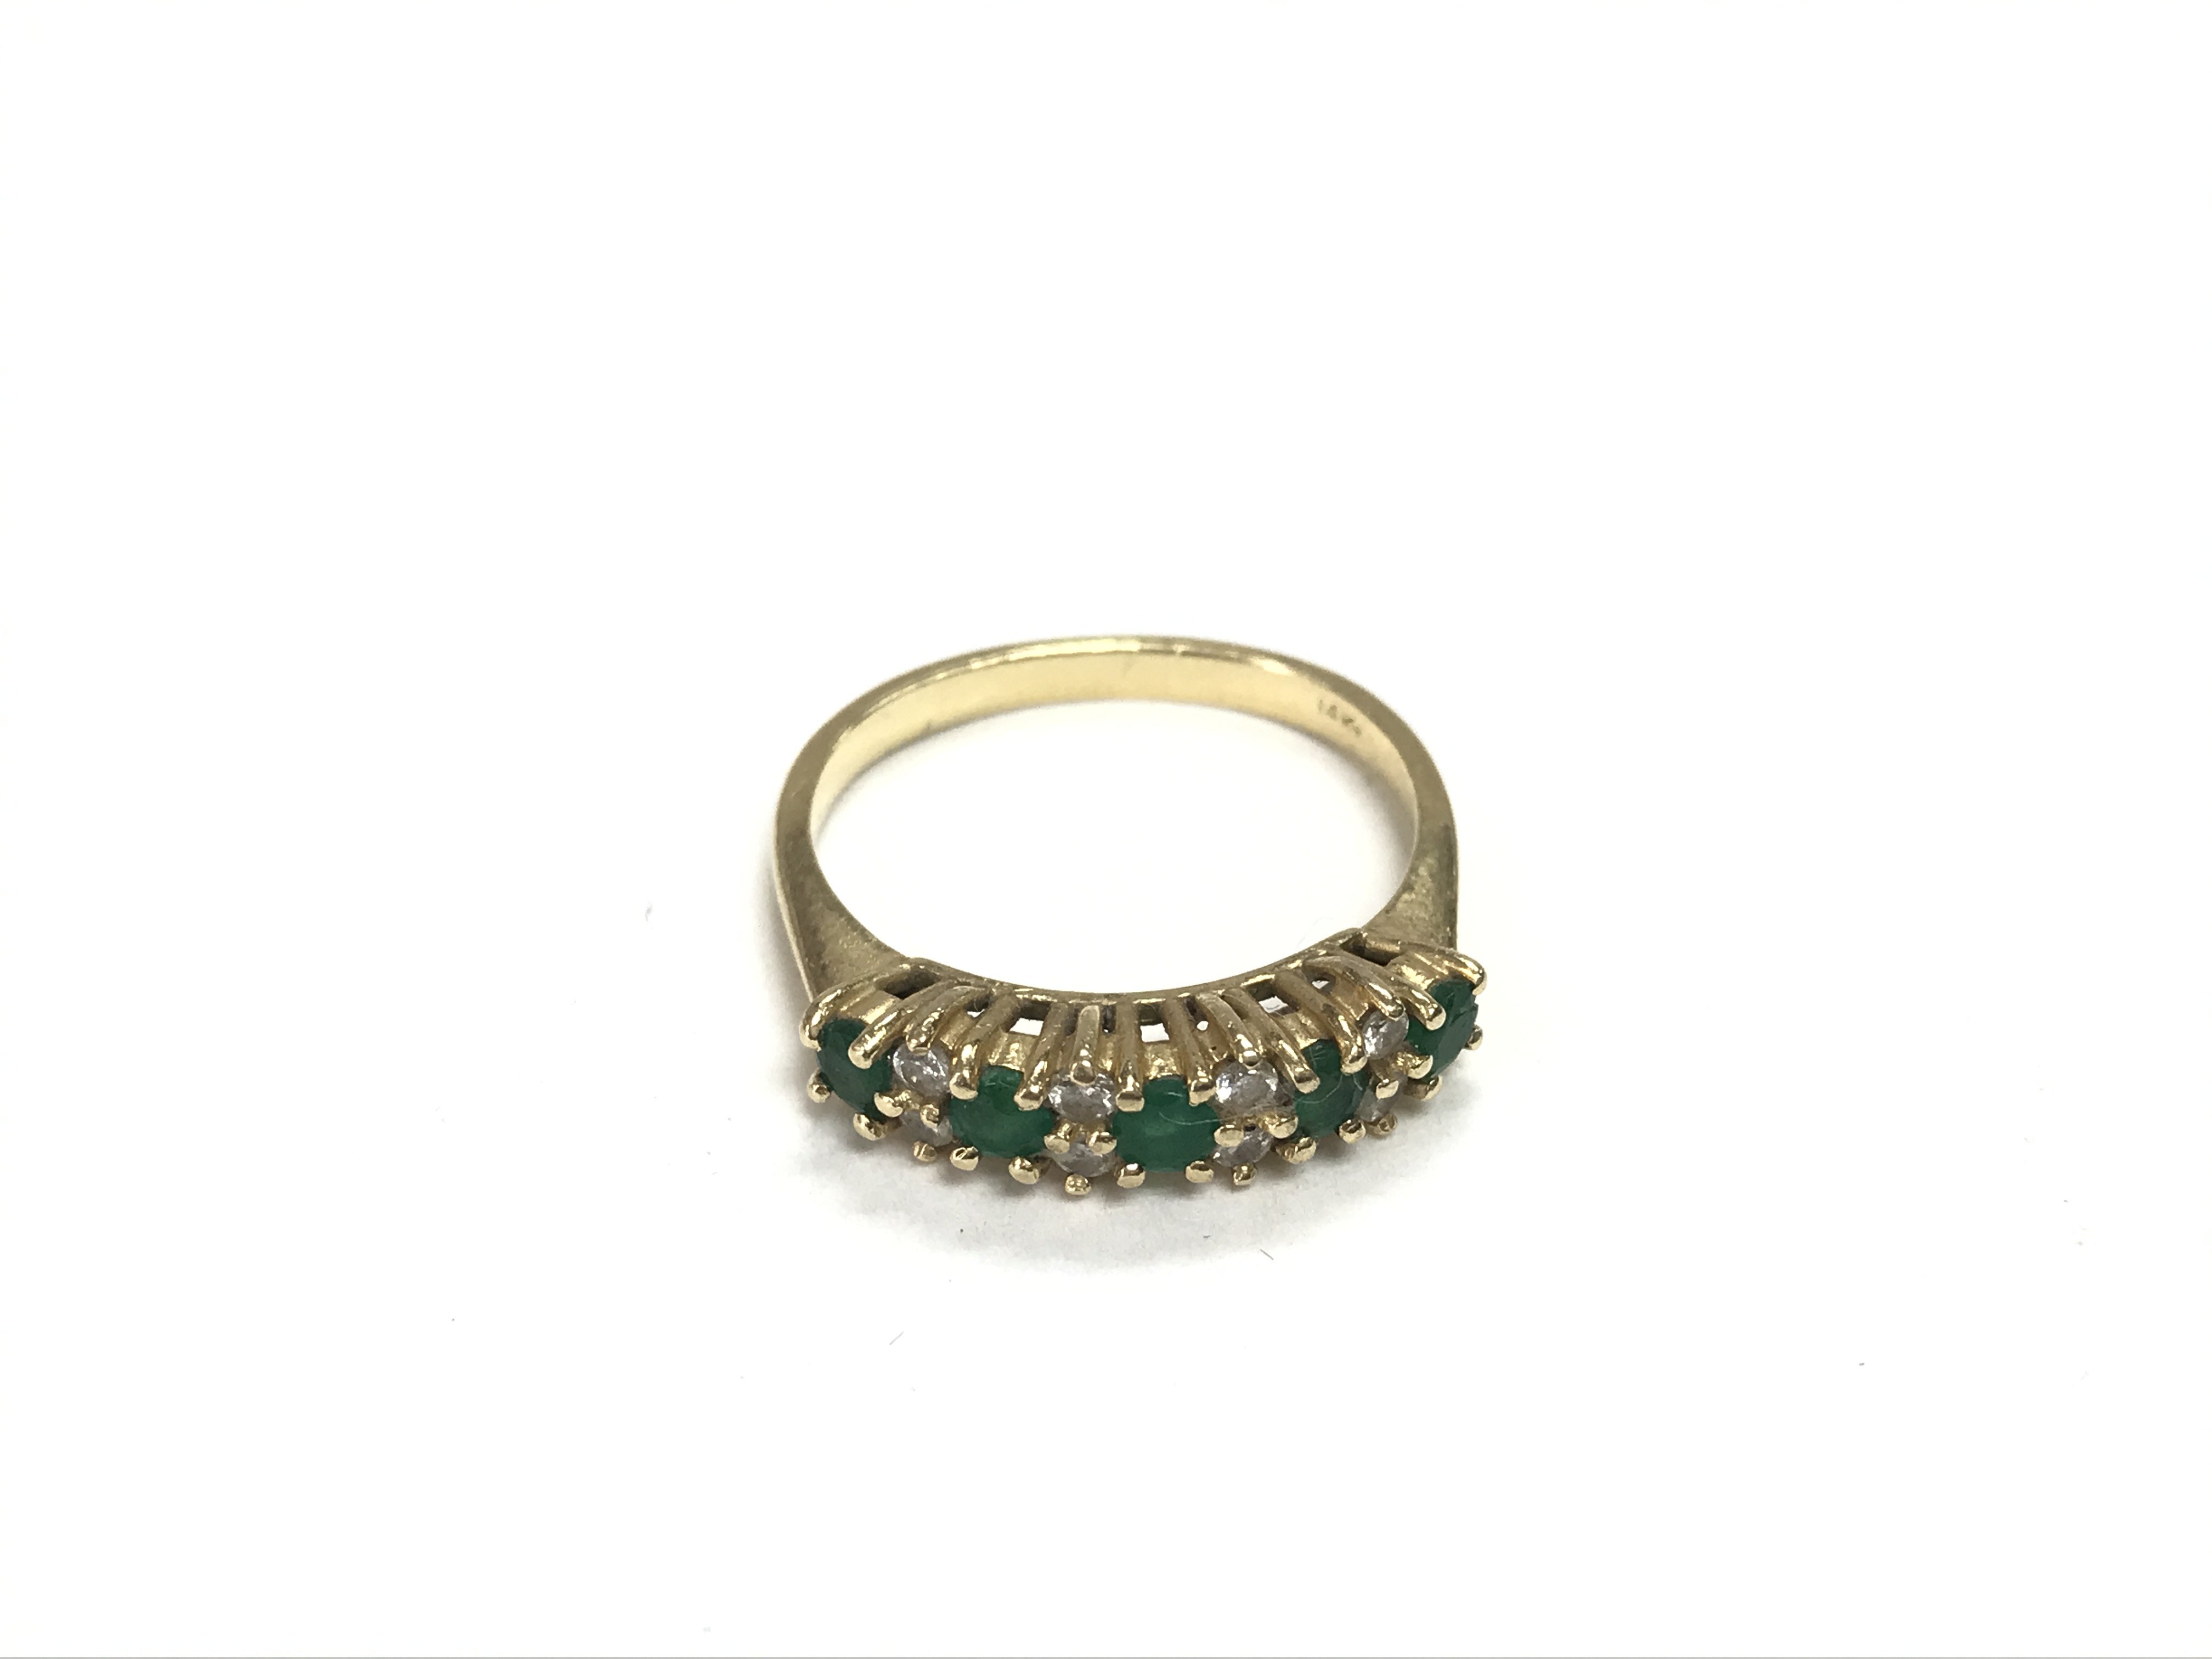 A 14ct emerald and diamond bracelet with matching - Image 3 of 3